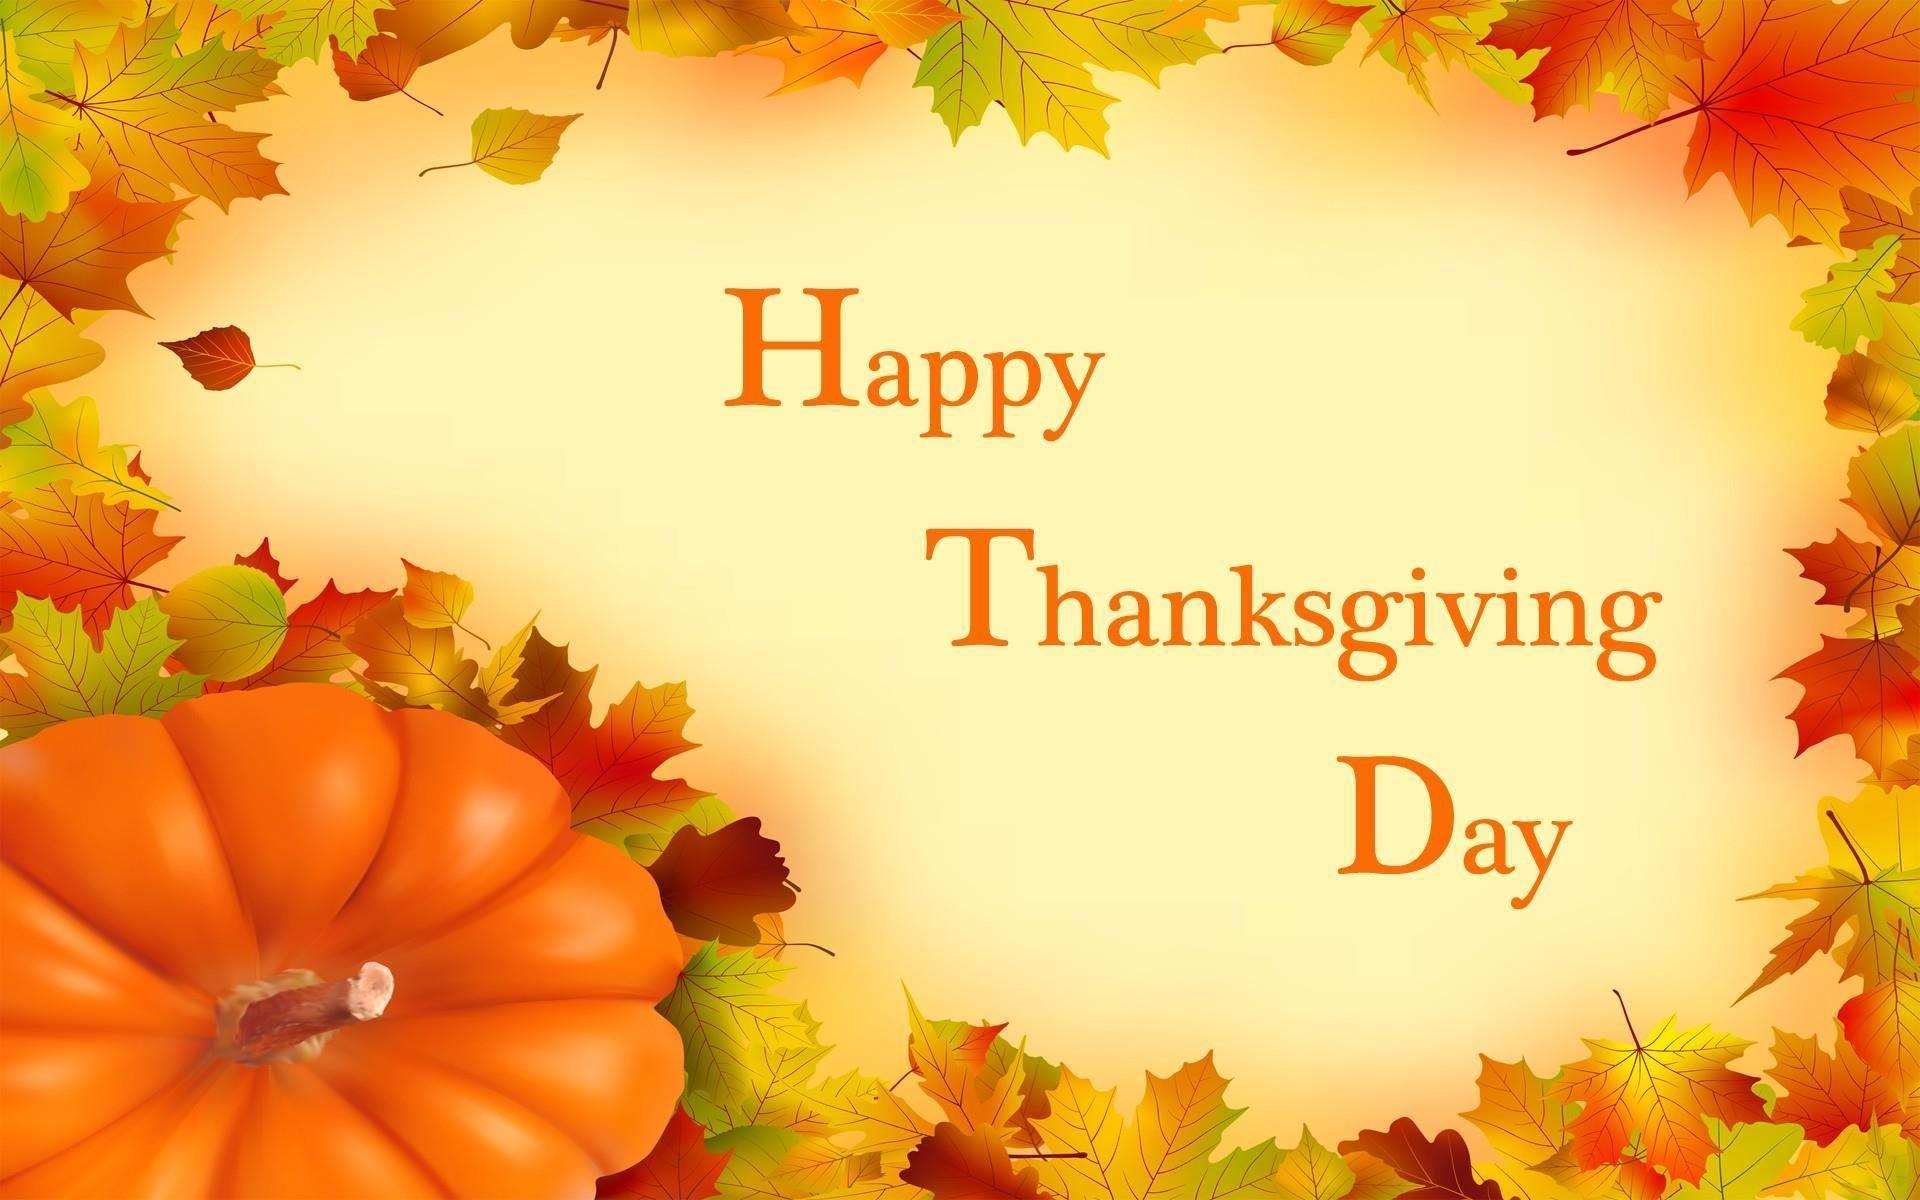 Happy Thanksgiving wishes. Fotolip.com Rich image and wallpaper